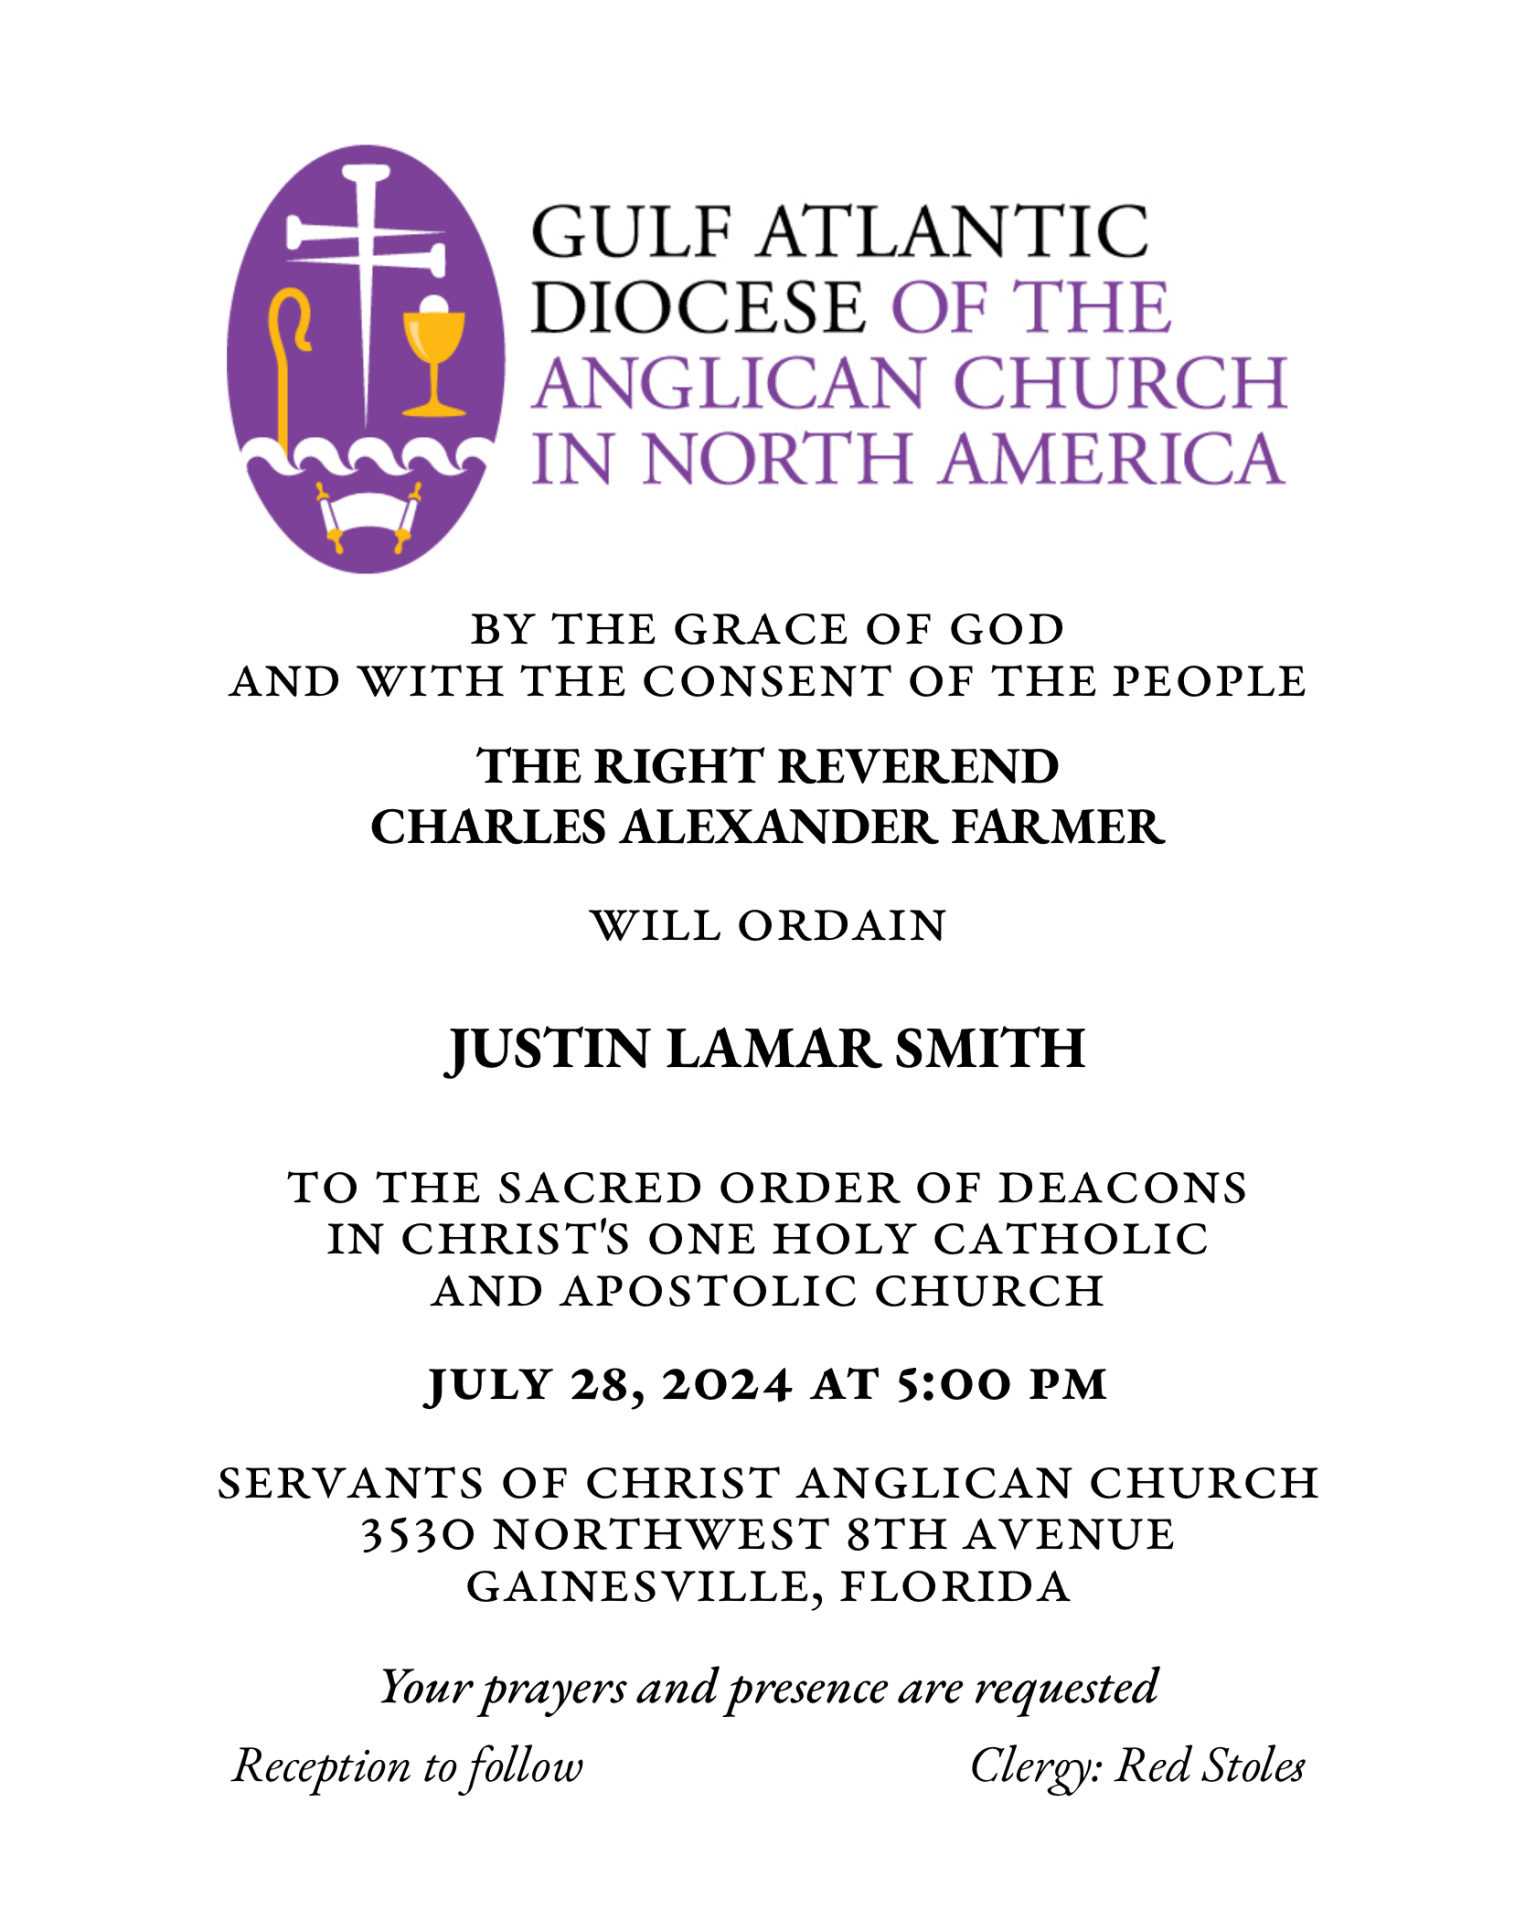 By the Grace of God and with the consent of the People the Rt. Rev. Alex Farmer will ordain JUSTIN LAMAR SMITH to the Sacred Order of Deacons in Christ's One Holy Catholic and Apostolic Church
July 28, 2024 at 5:00 p.m.
Servants of Christ Anglican Church
3530 Northwest 8th Avenue
Gainesville, Florida
Your prayers and presence are requested